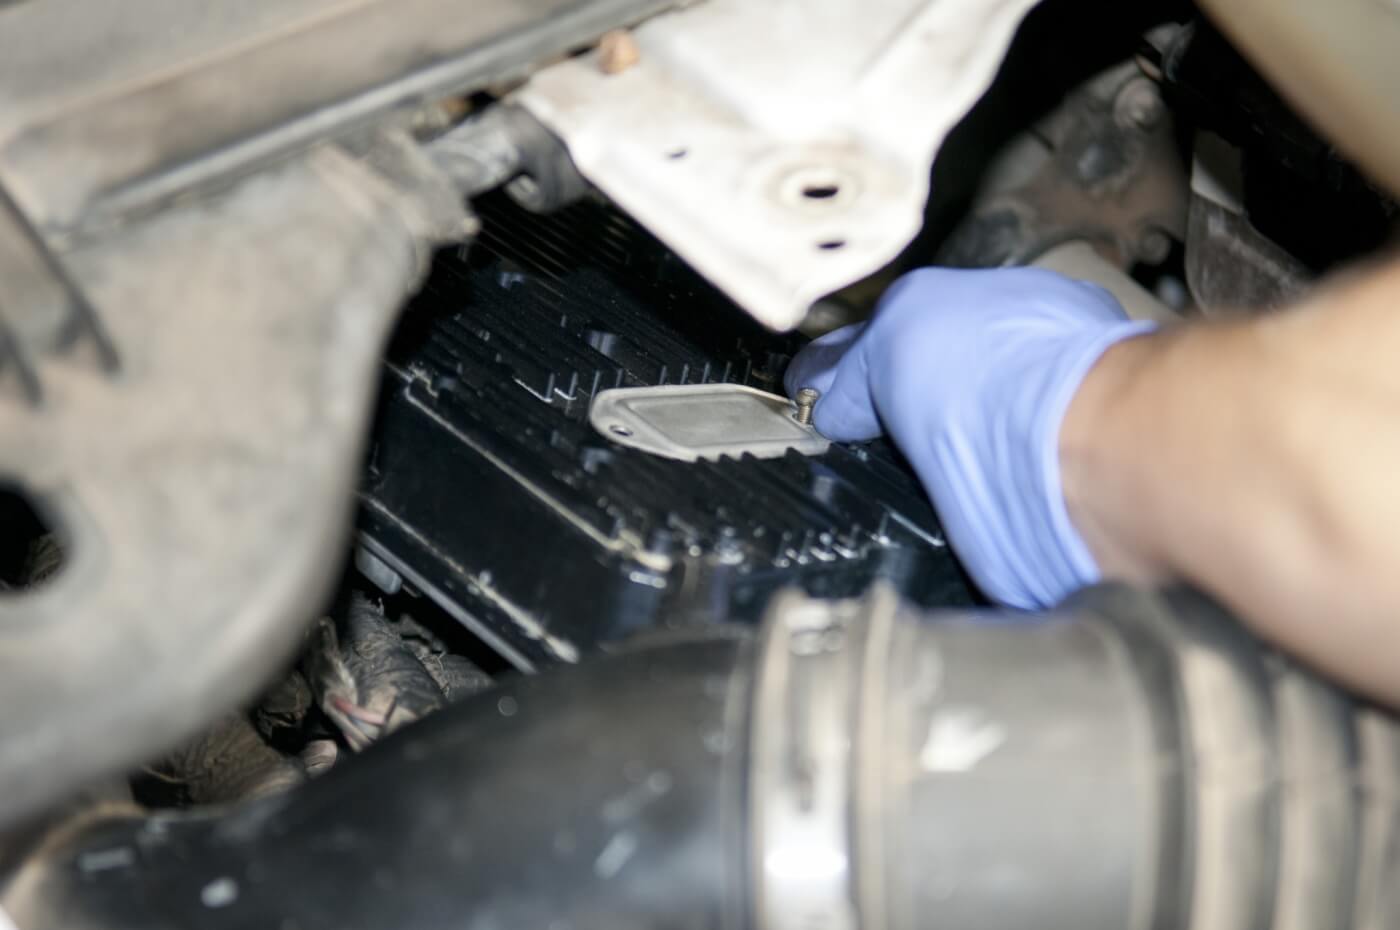 1. The FICM on this F-350 is mounted over the driver’s side valve cover. Before taking the FICM out of the truck, remove the service cover and do a diagnostic test (as outlined in the truck’s service manual) to see if it’s actually bad.